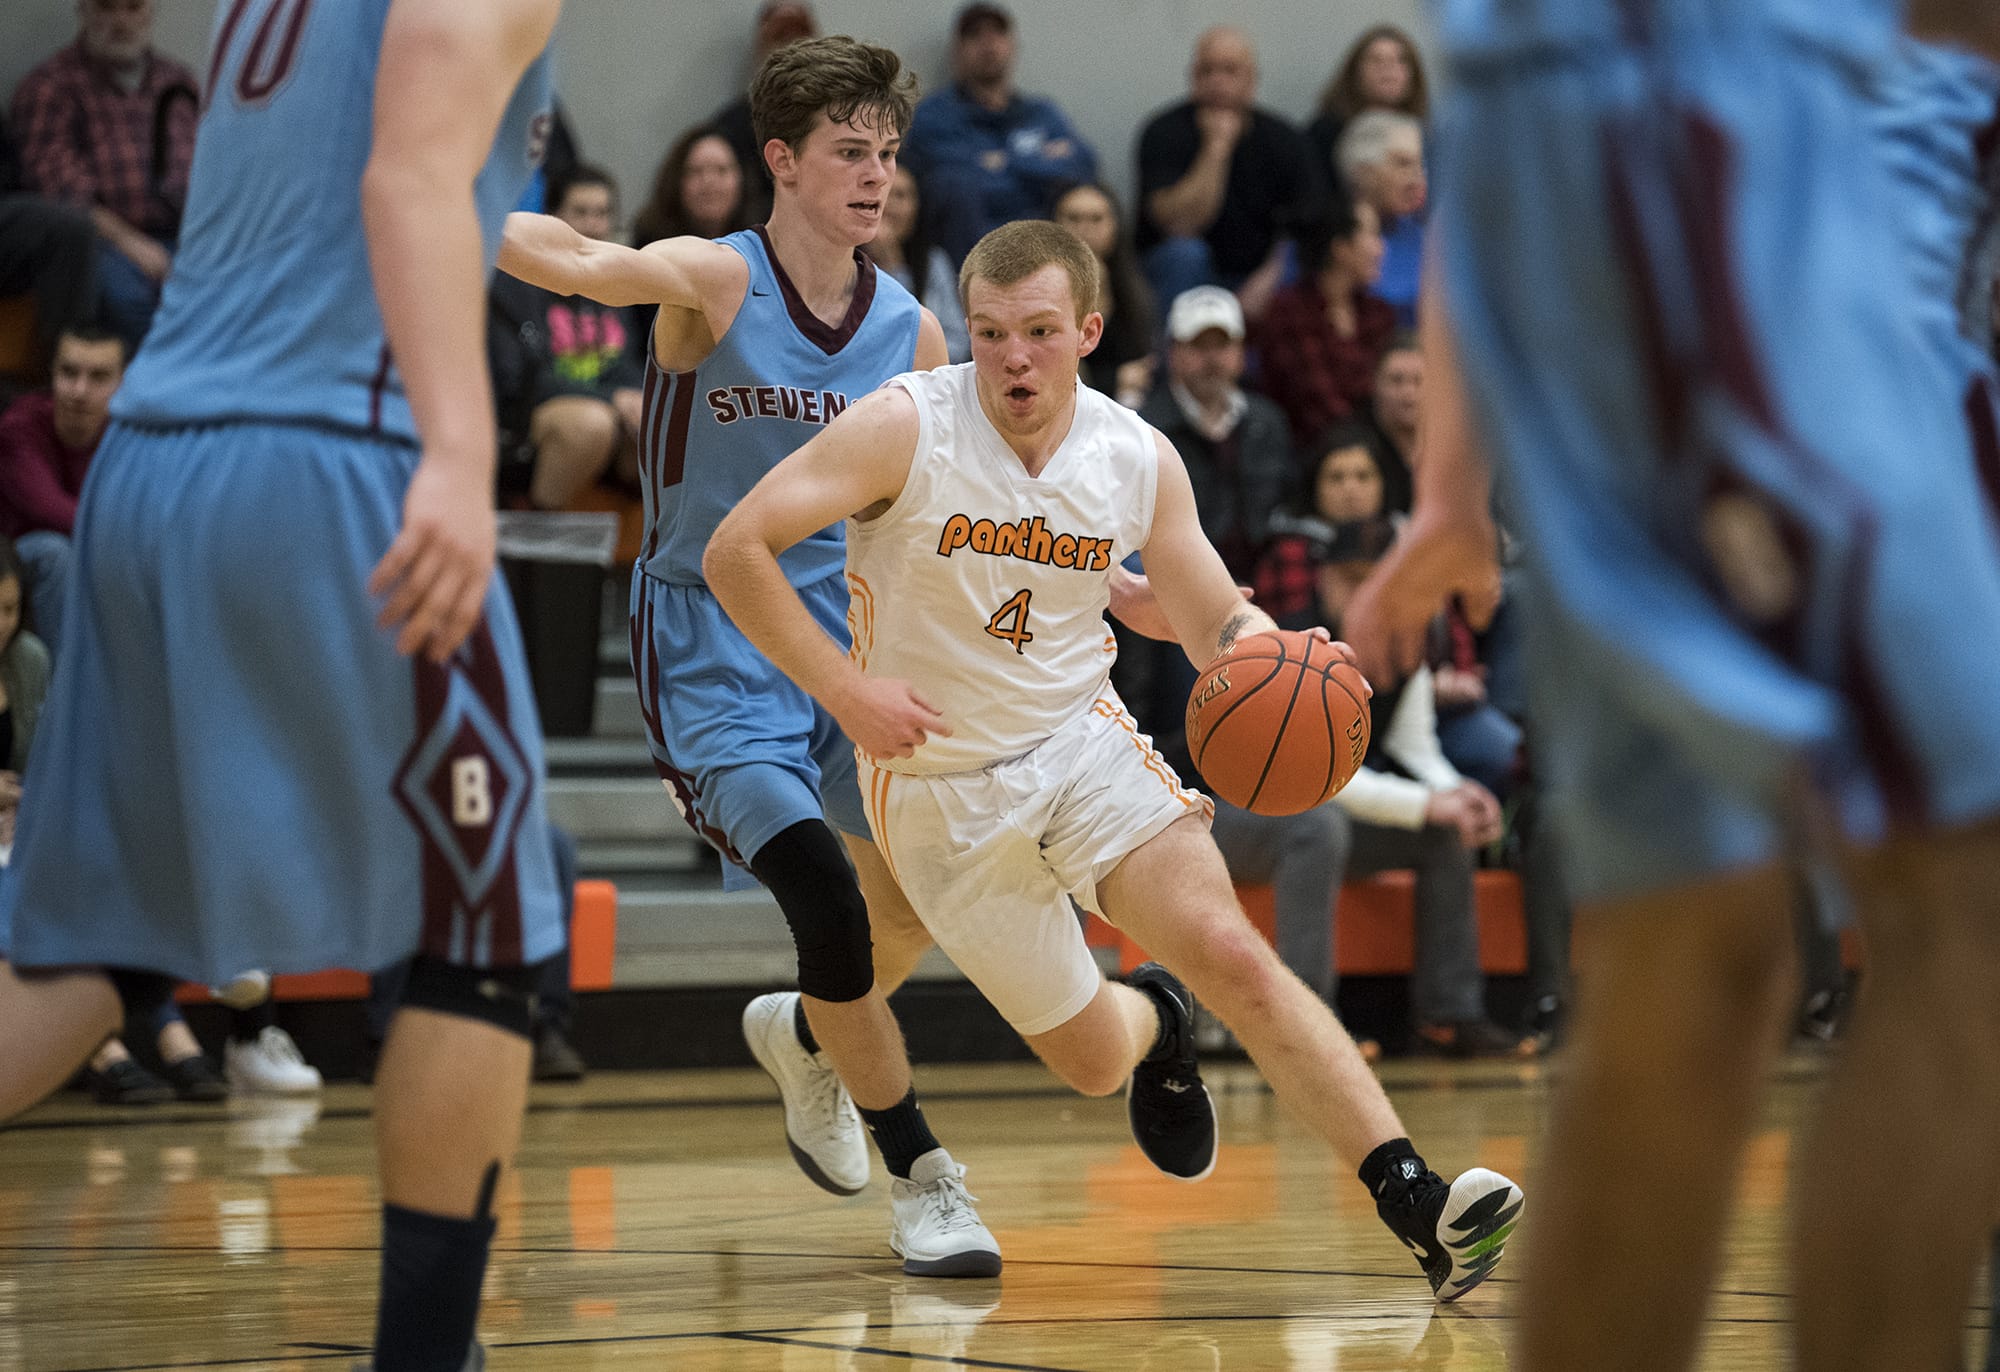 Washougal's Carter Murray (4) drives to the basket during Tuesday night's game against Stevenson in Washougal on Nov. 27, 2018. Washougal won 58-39.